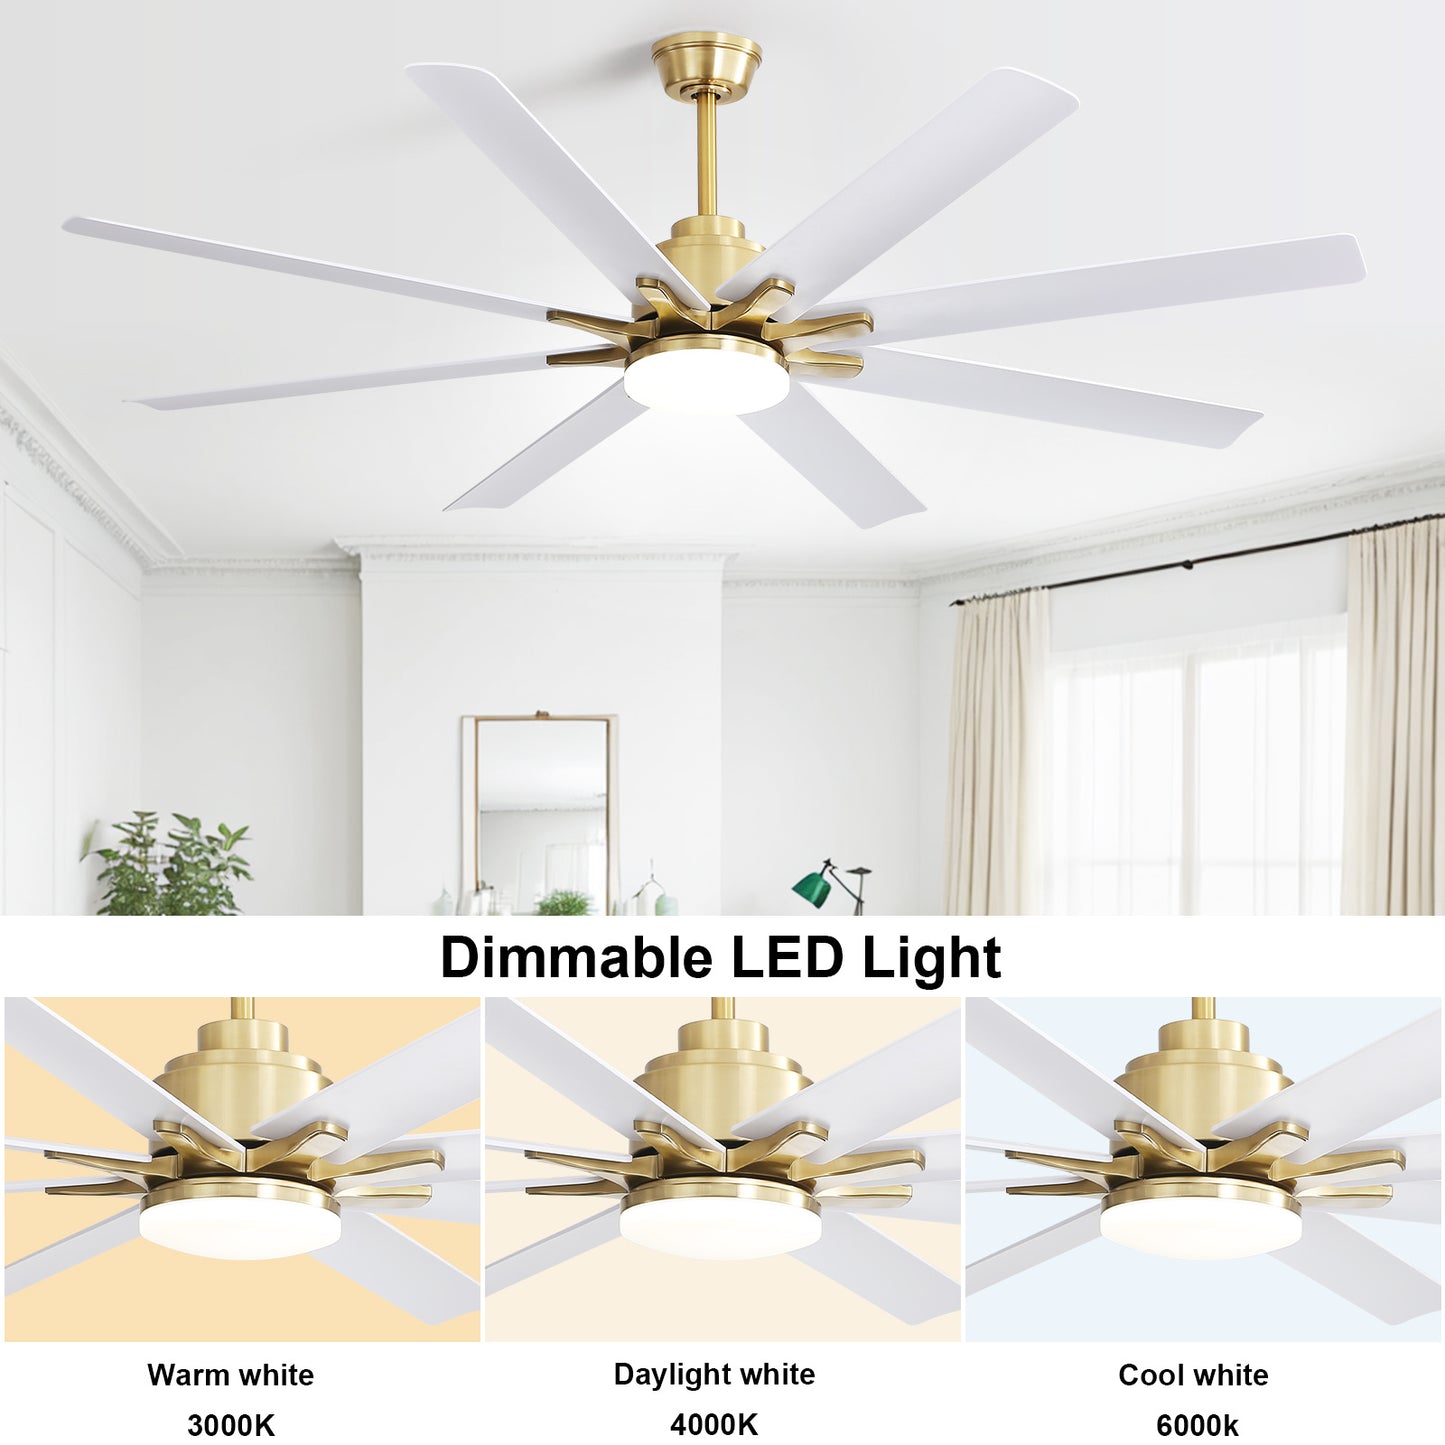 66 Inch Low Profile Ceiling Fan with Dimmable Lights and Smart Remote Control 6 Speed Reversible Noiseless DC Motor for Indoor